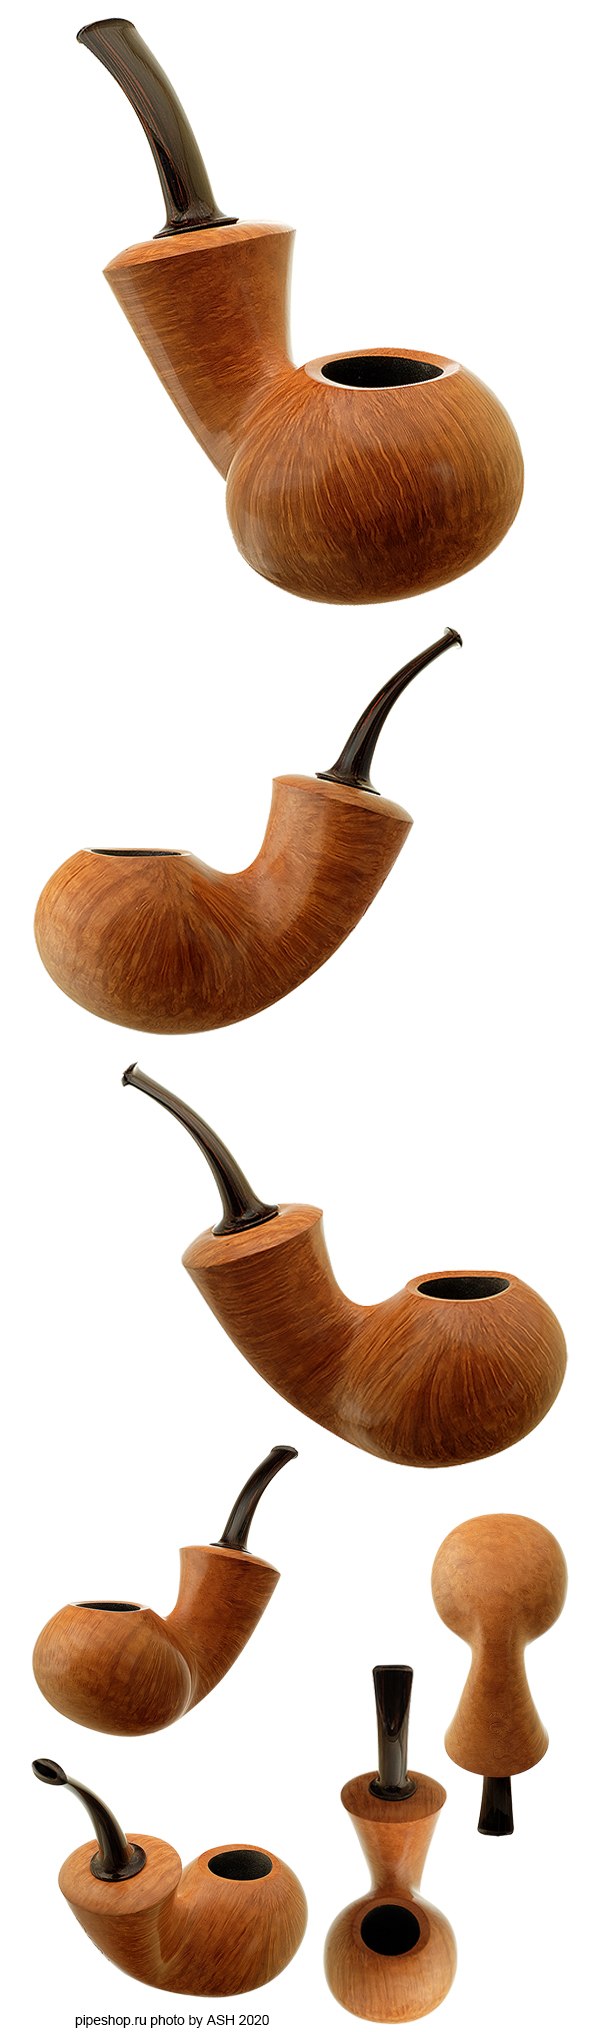   GABRIELE DAL FIUME SMOOTH FULL BENT APPLE Grade SNAIL